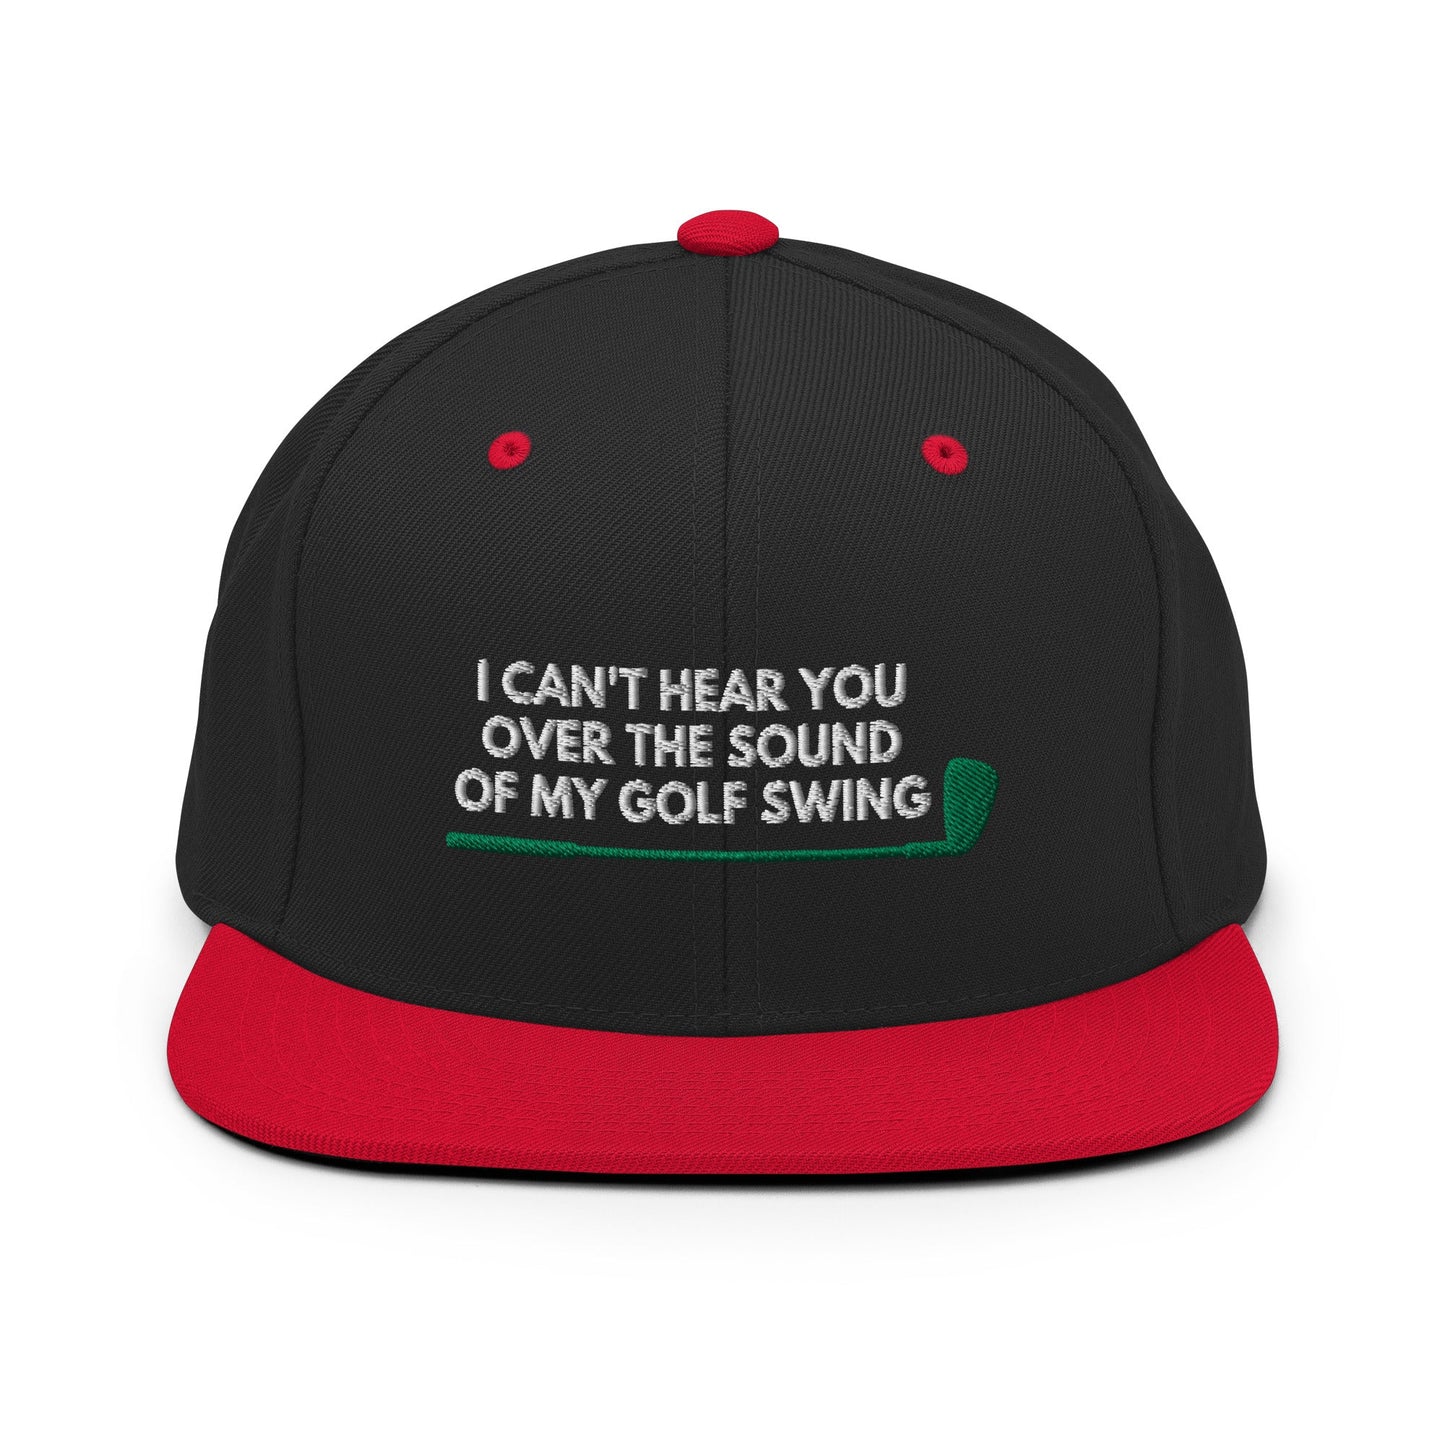 Funny Golfer Gifts  Snapback Hat Black/ Red I Cant Hear You Over The Sound Of My Golf Swing Hat Snapback Hat